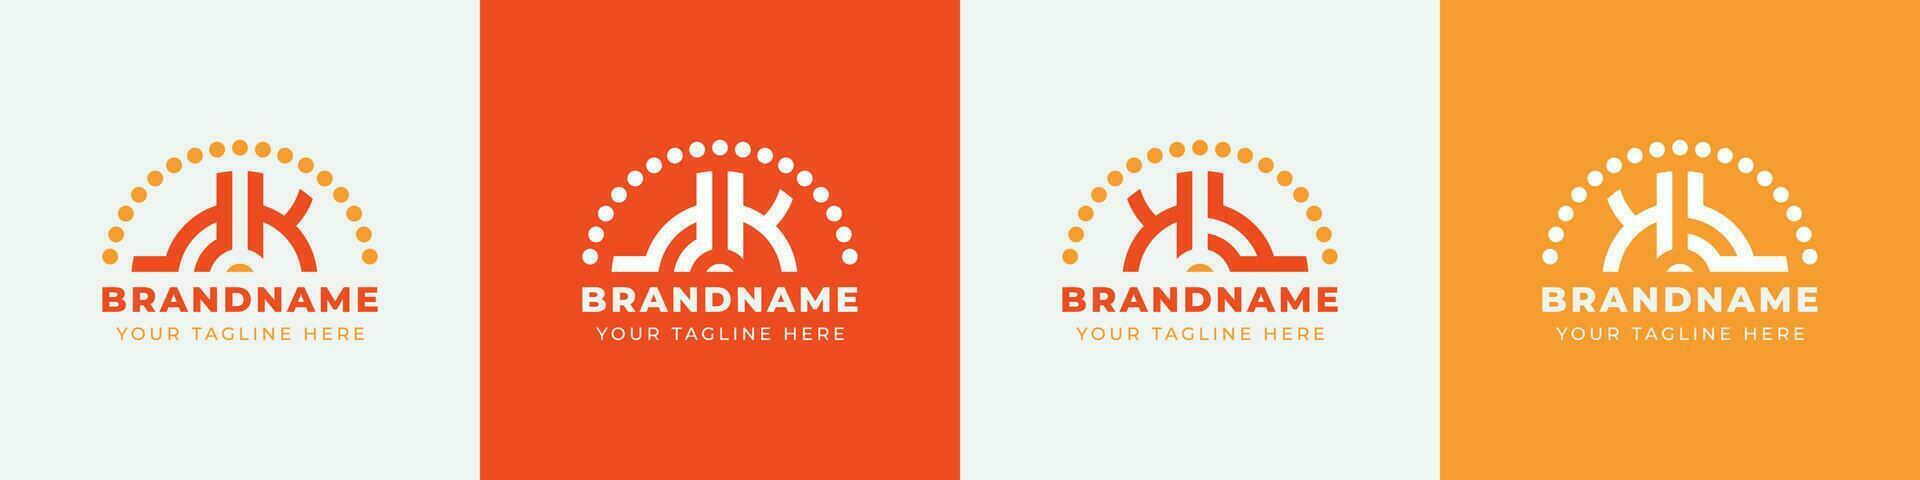 Letter KY and YK Sunrise  Logo Set, suitable for any business with KY or YK initials. vector